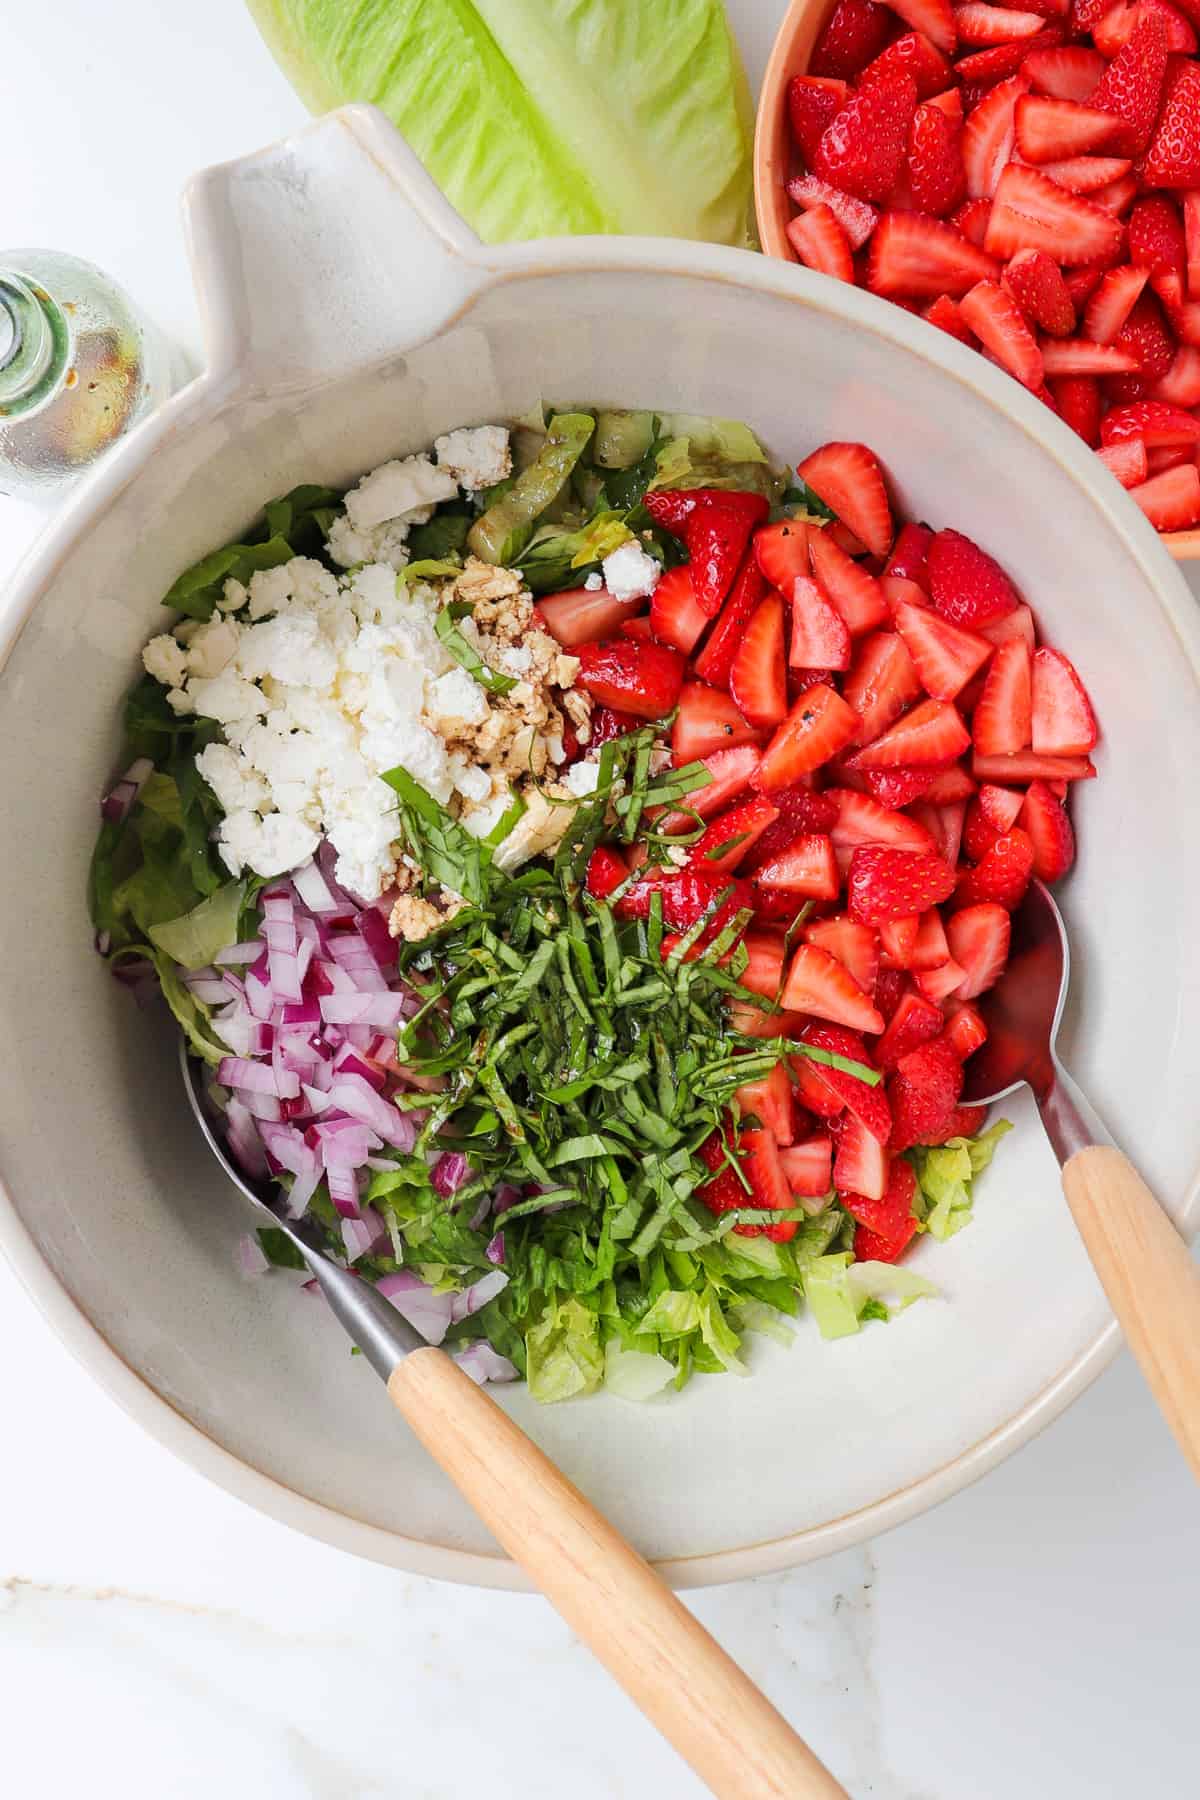 All of the salad ingredients in a large mixing bowl, unmixed.